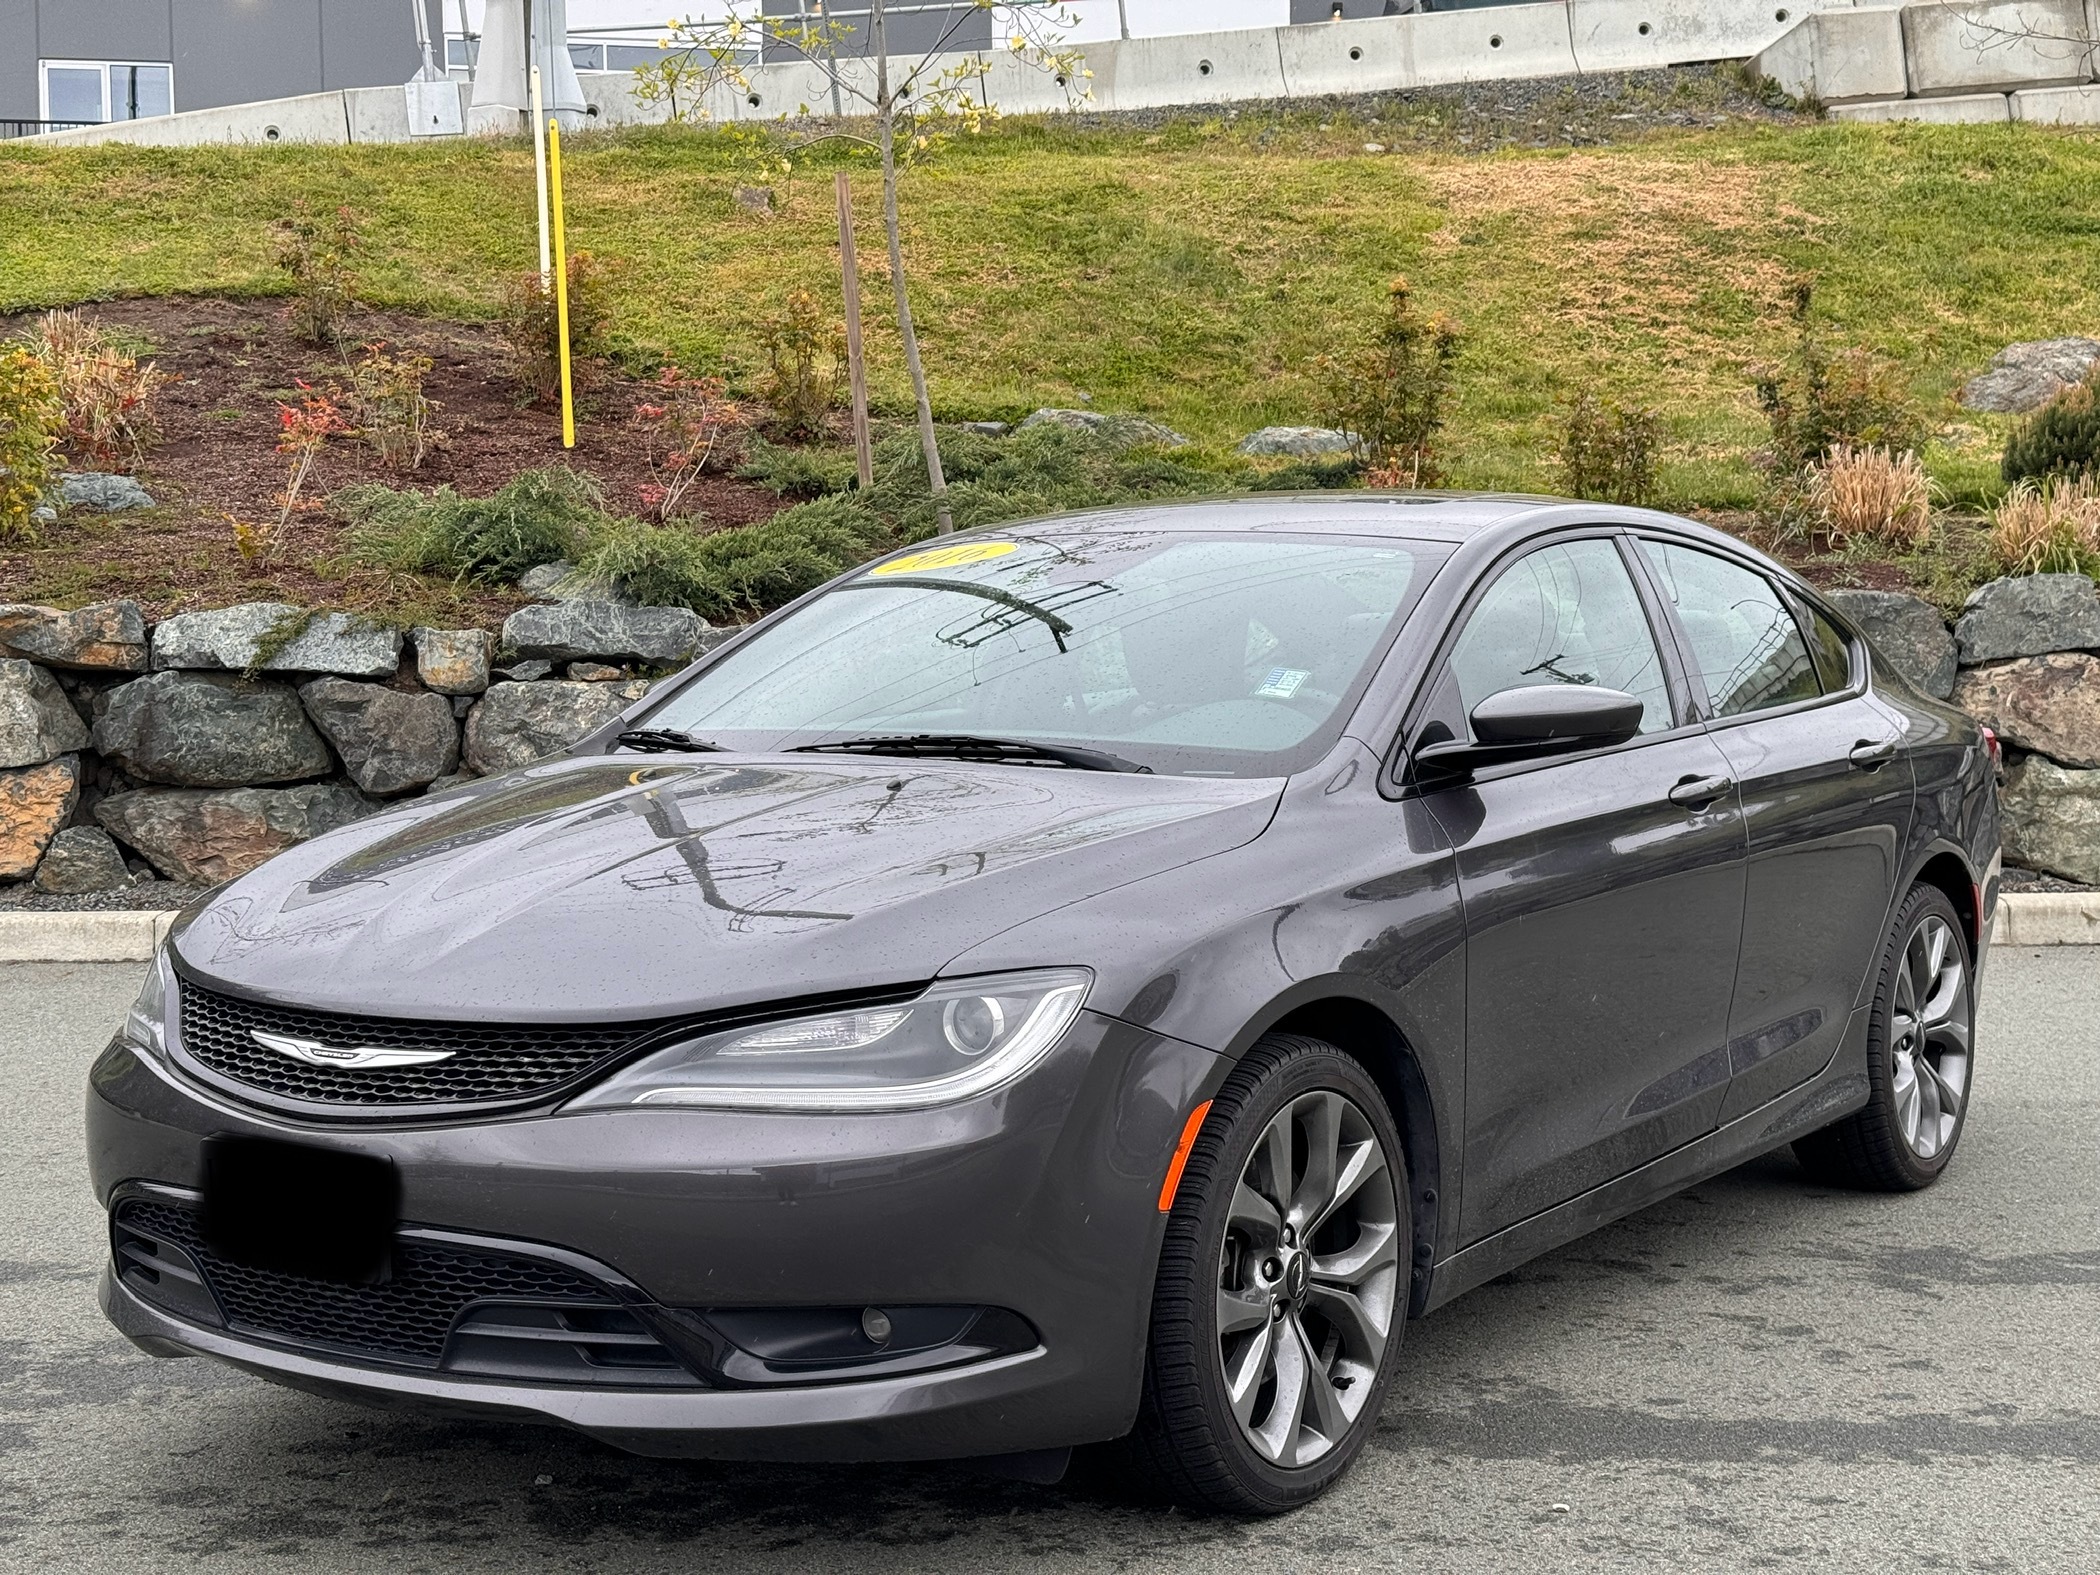 2016 Chrysler 200 S FWD-Pano Sunroof,GPS,Uconnect,Heated Seats,A/C